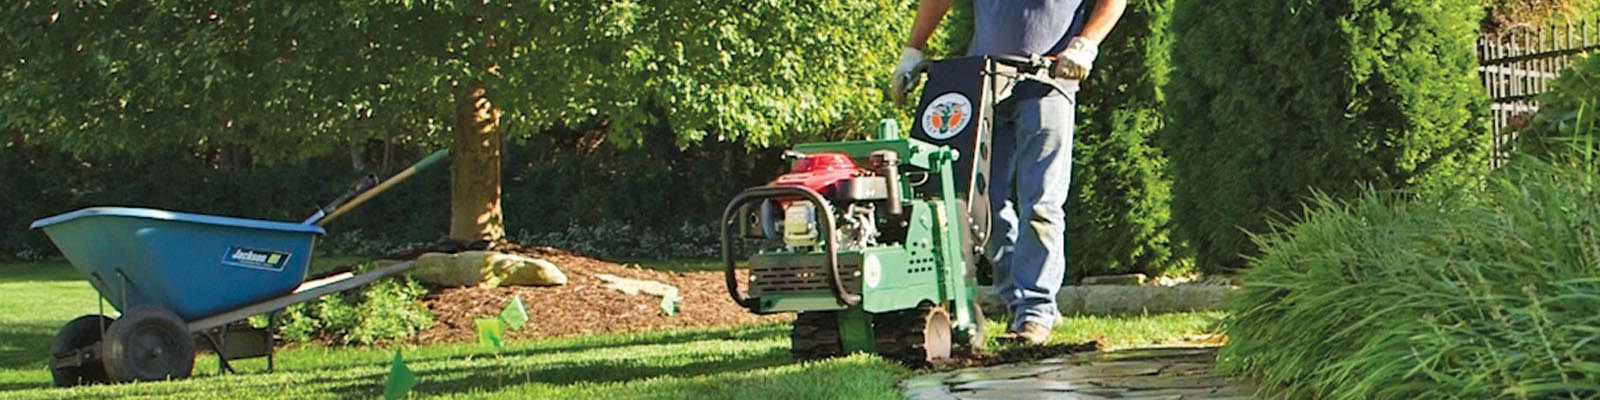 Person using sod cutter